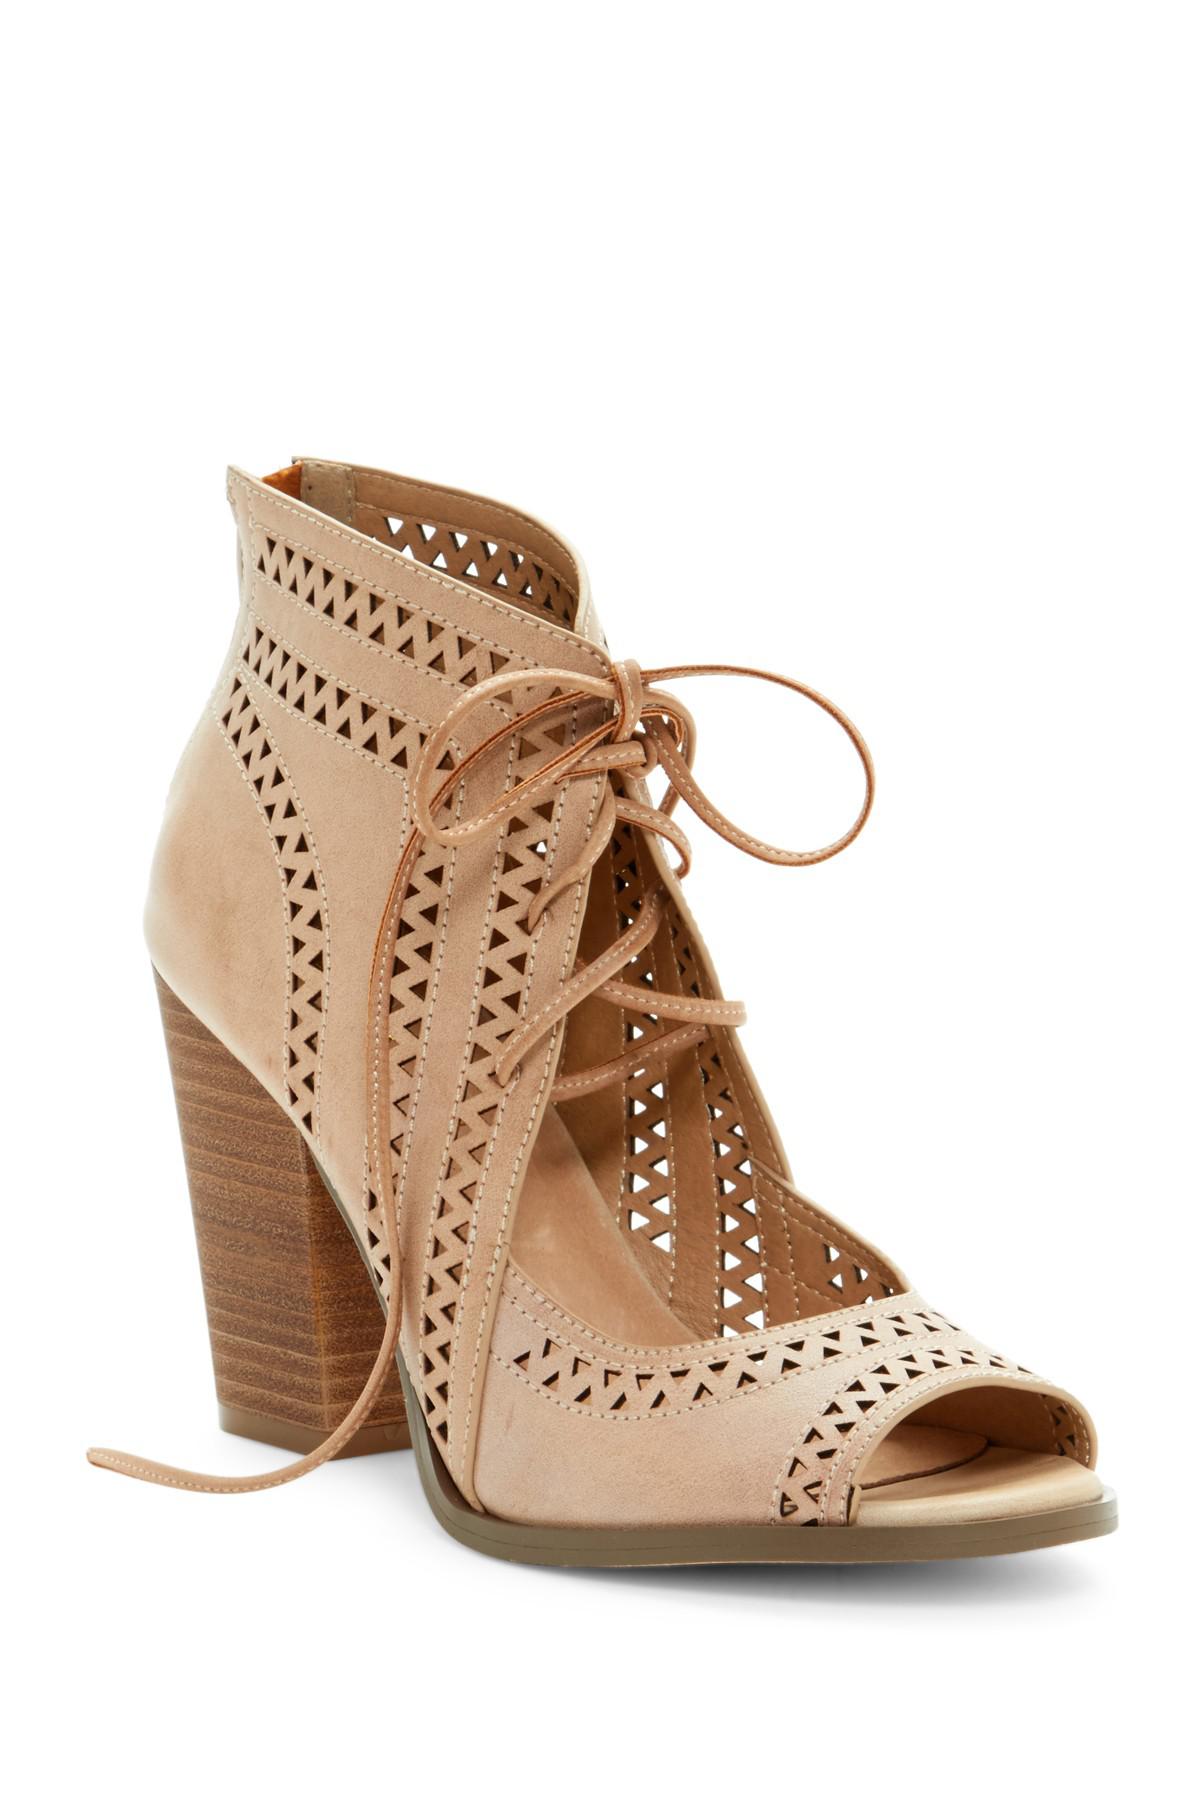 Restricted Weekday Lace-up Heel Sandal in Natural | Lyst